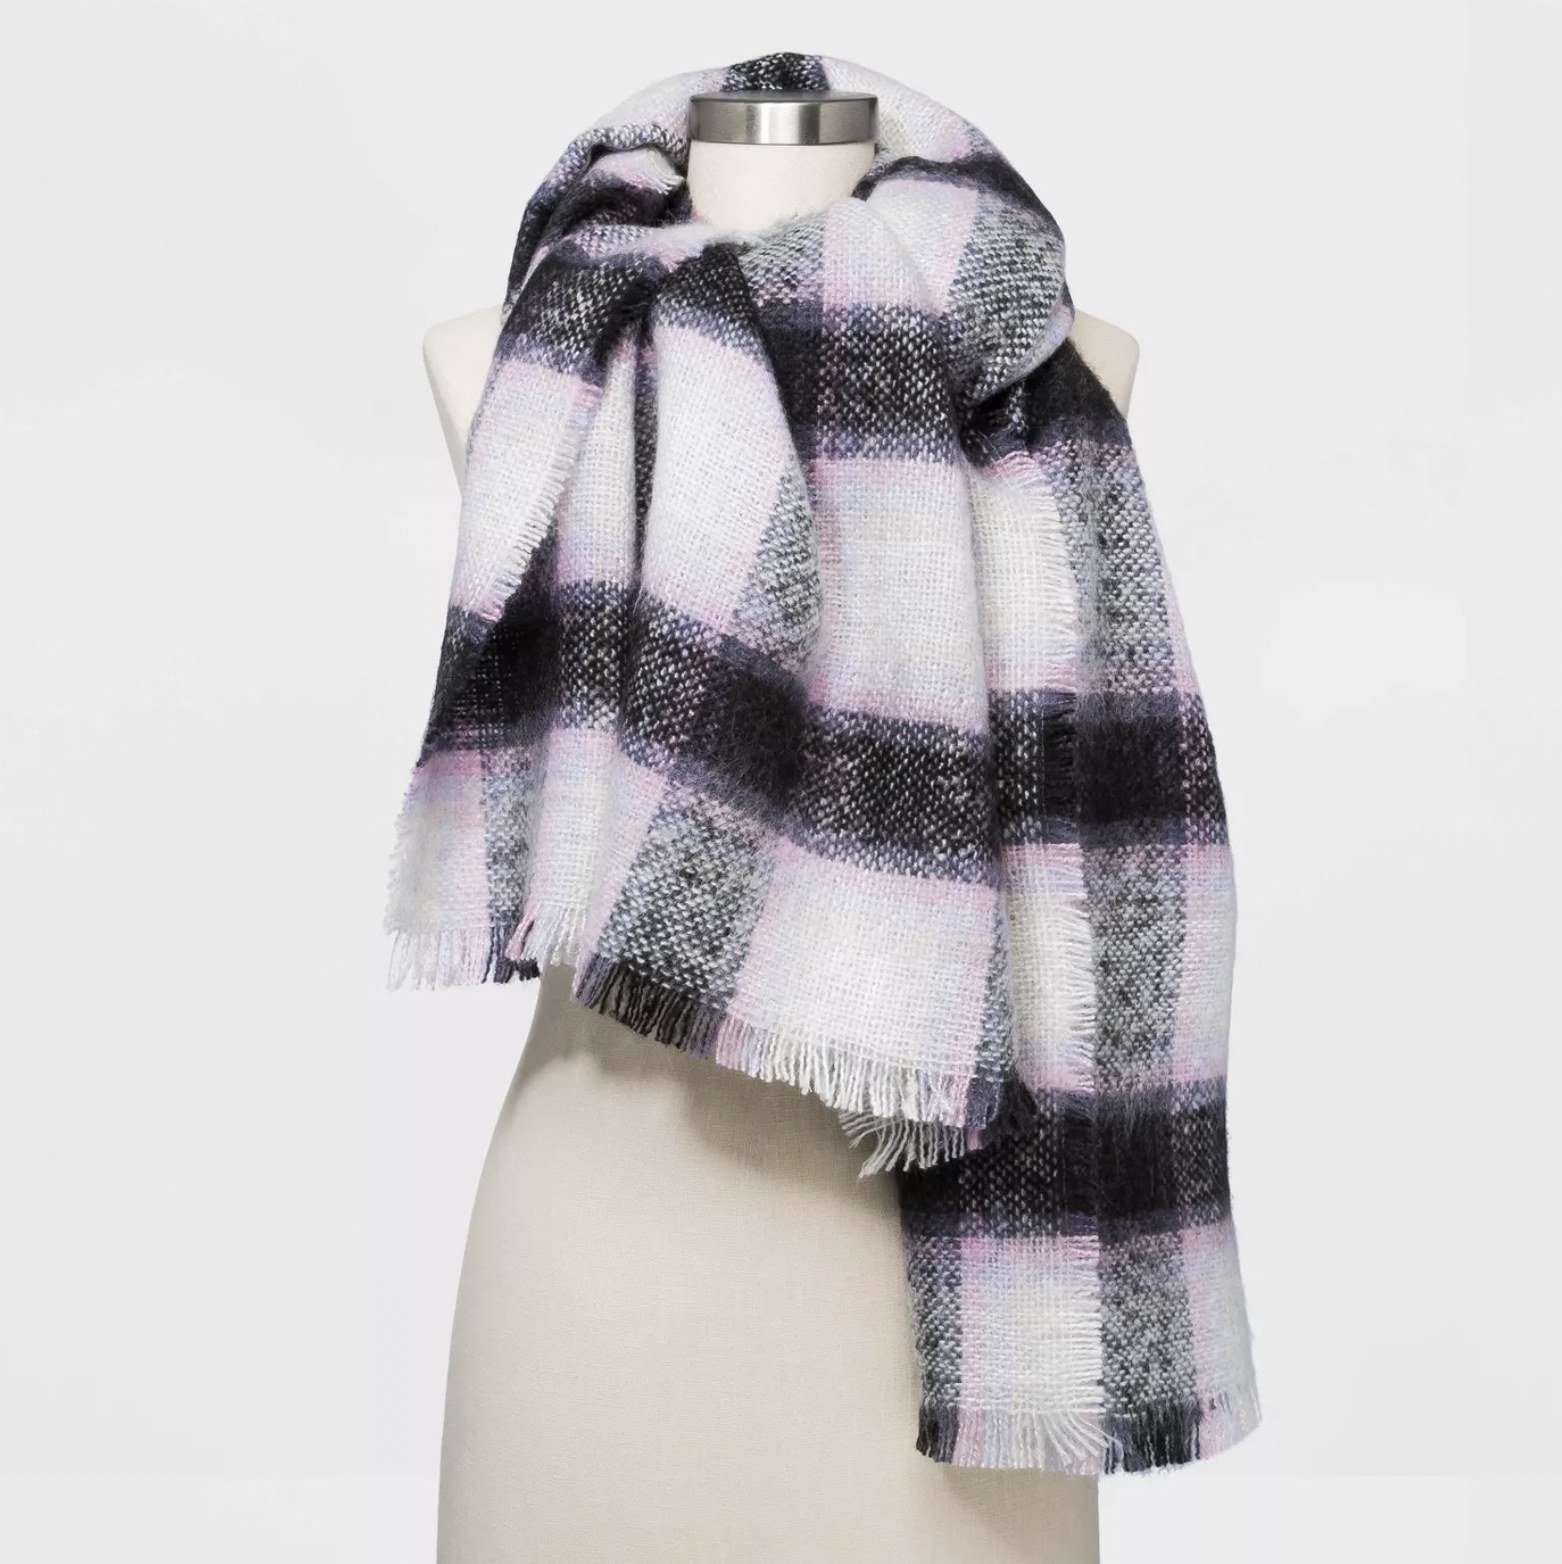 The purple, black, and white scarf with fringe detailing wrapped around a mannequin